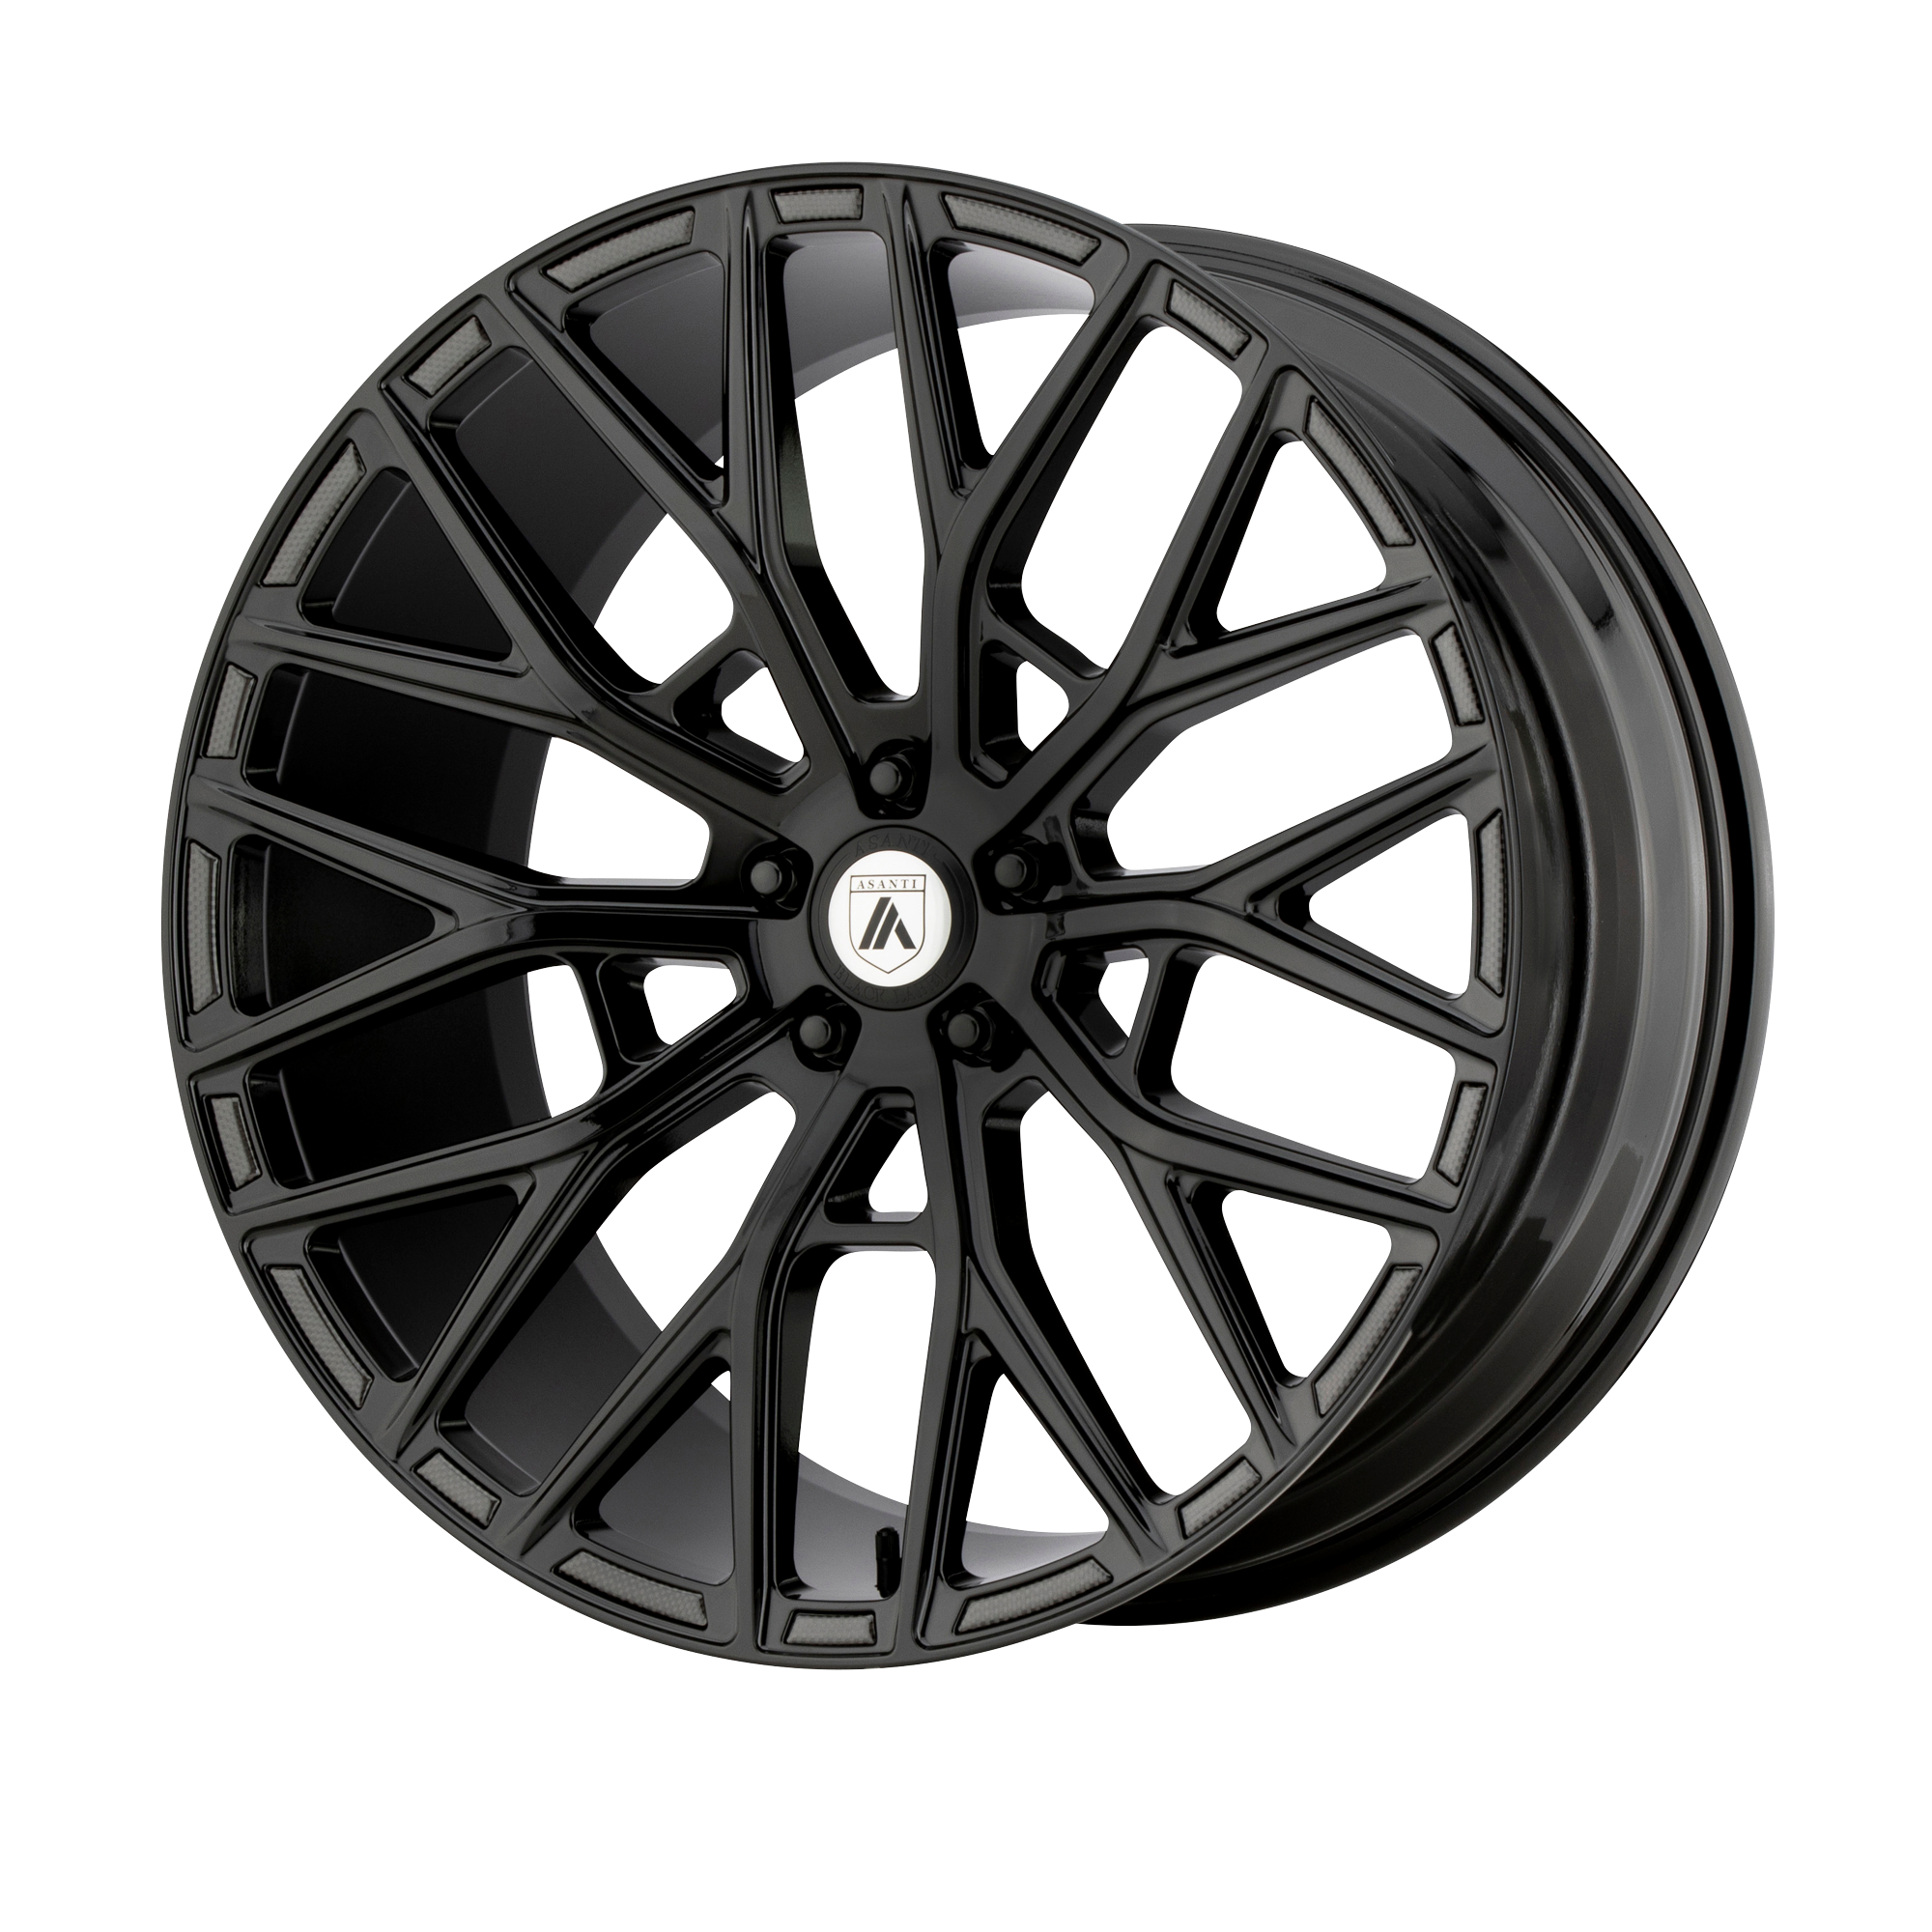 LEO 20x8.5 5x112.00 GLOSS BLACK (38 mm) - Tires and Engine Performance